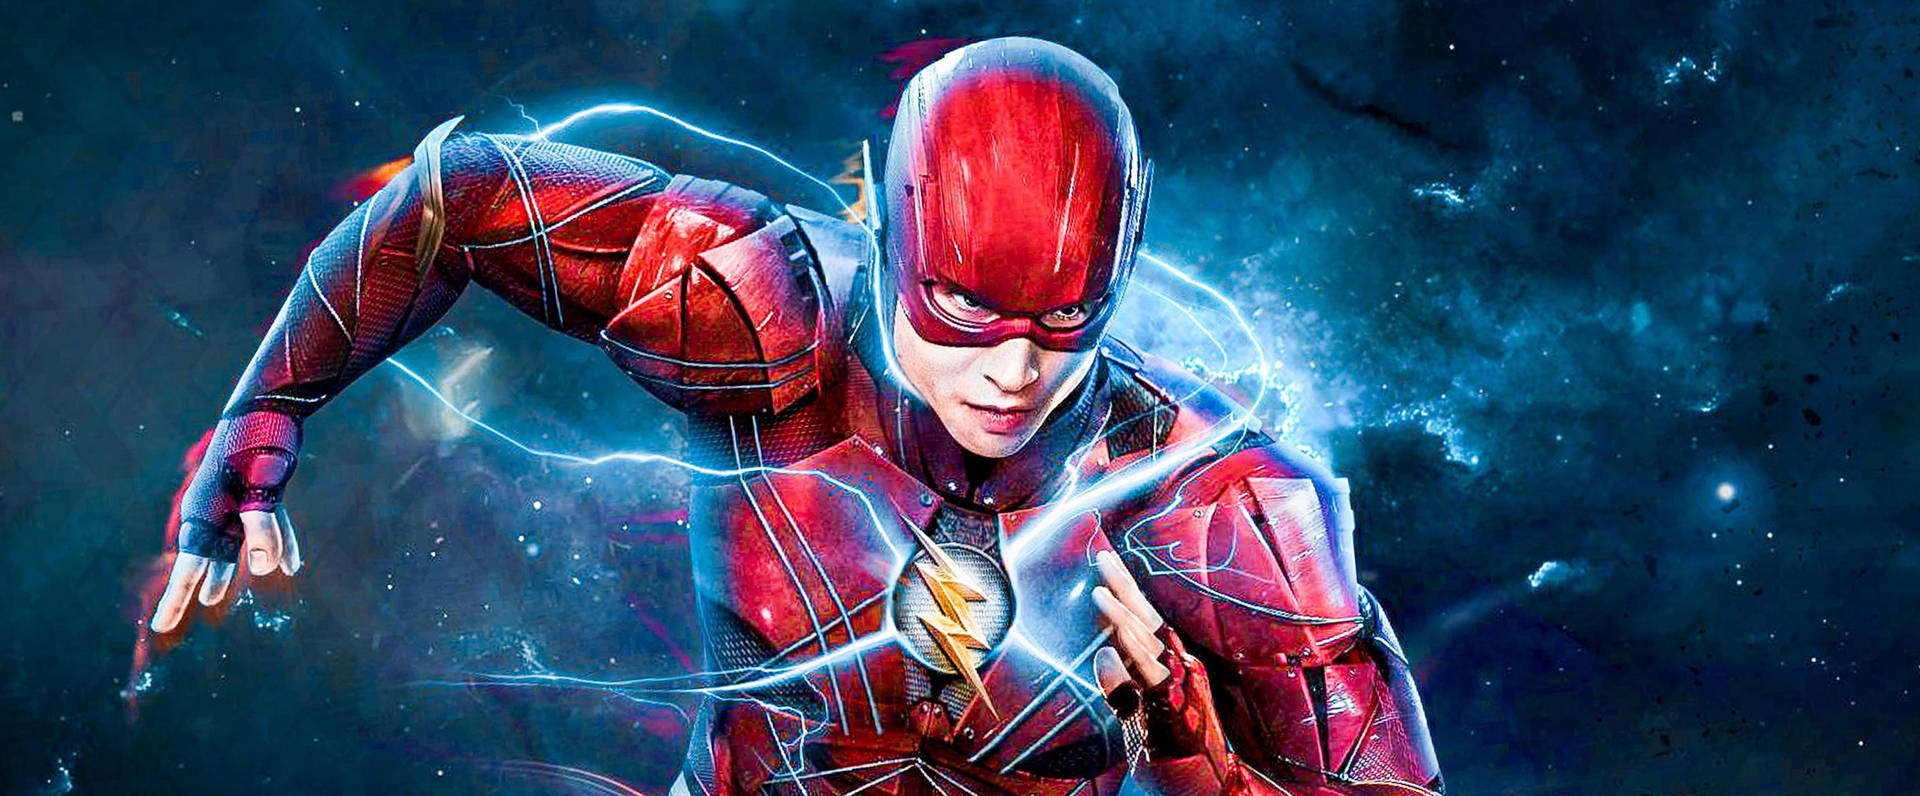 The Flash With Fast Blue Lightning Background